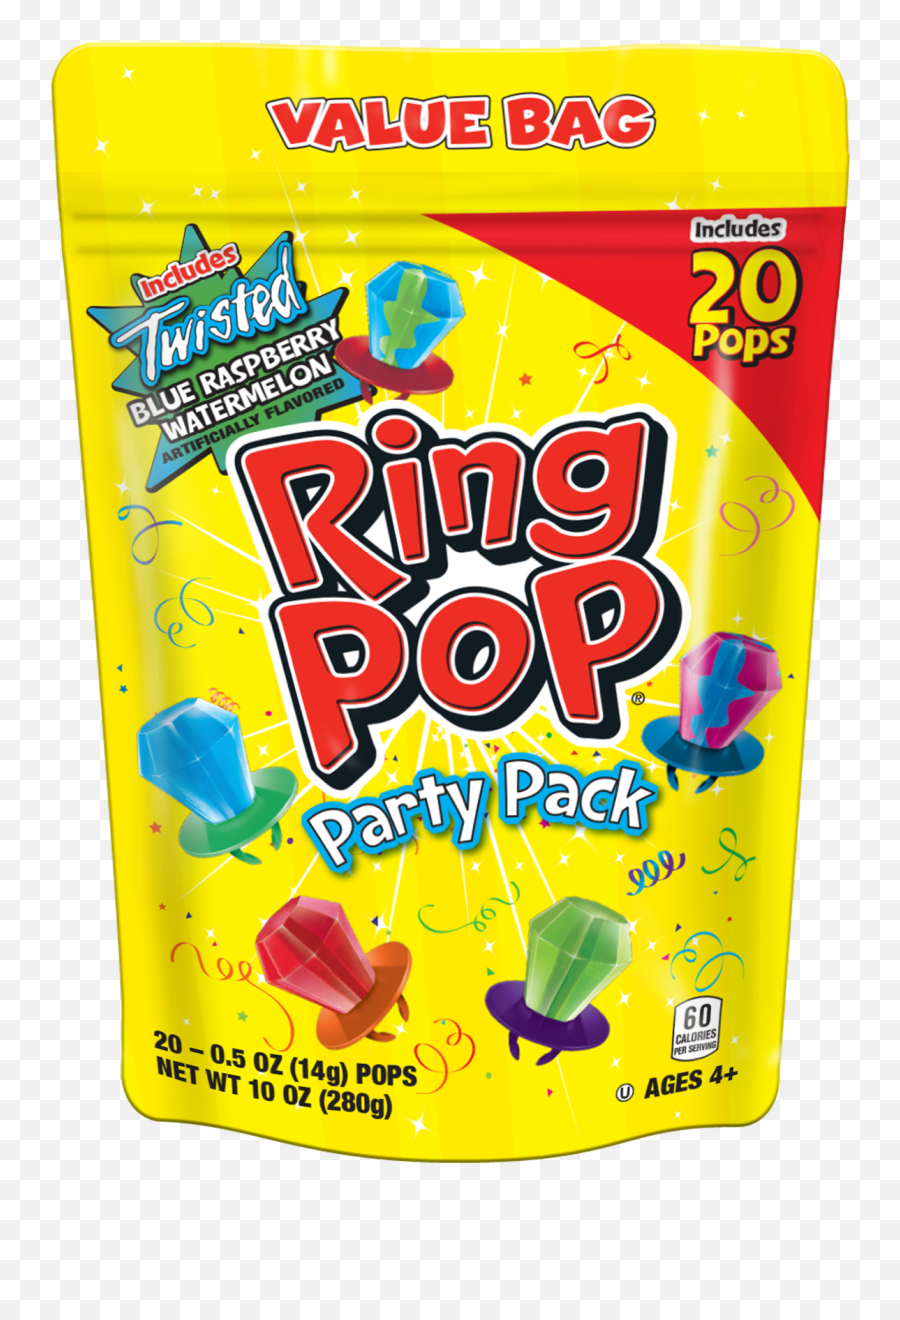 Ring With Candy - Ring Pop Candy Variety Pack Bag Emoji,Emotion Candy